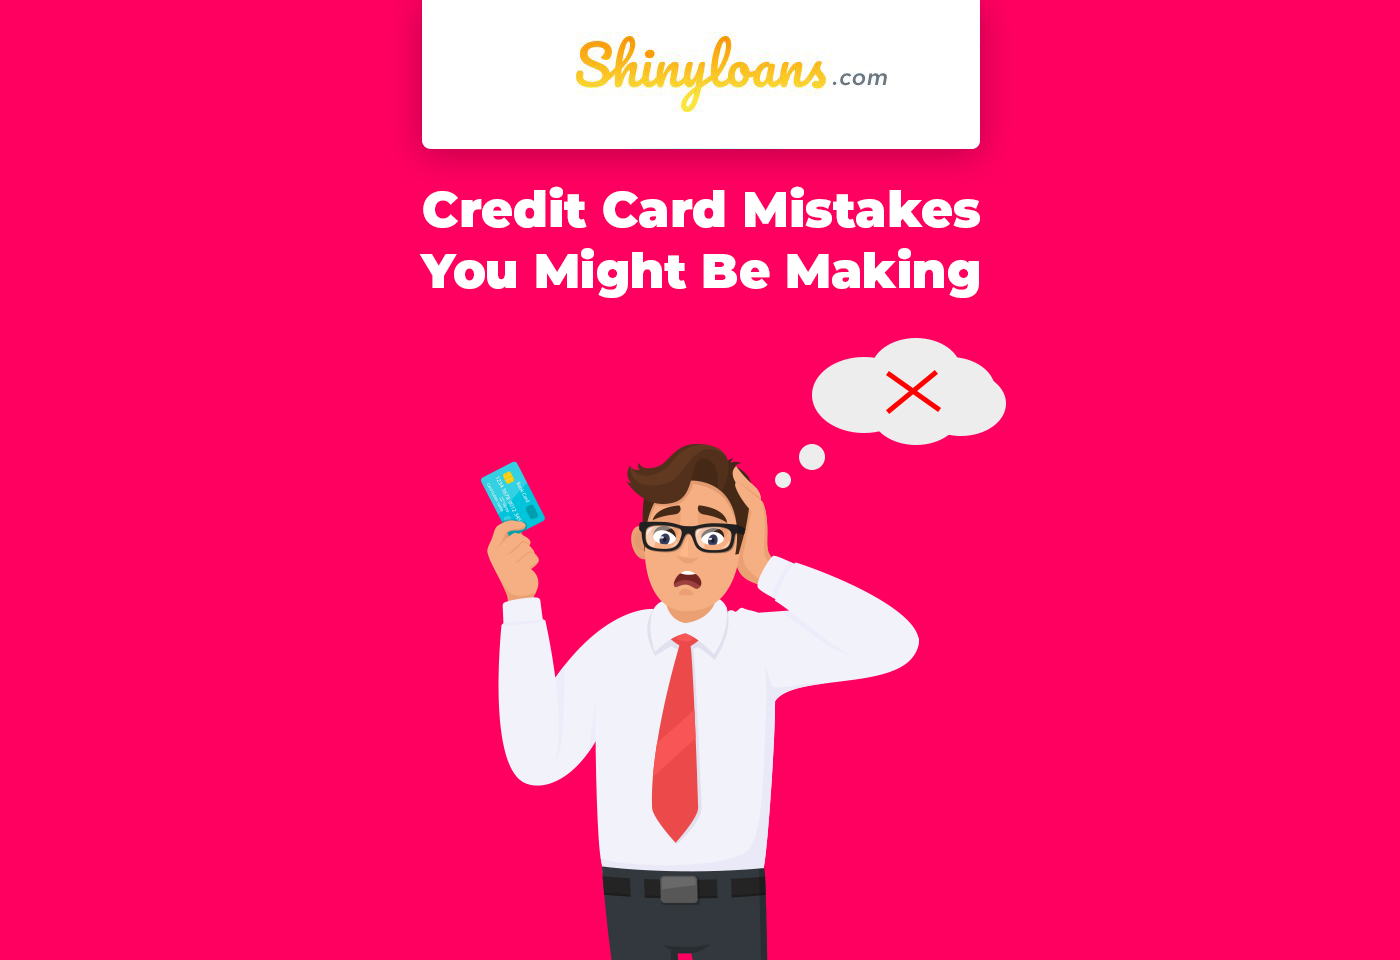 10 Credit Card Mistakes You Might Be Making